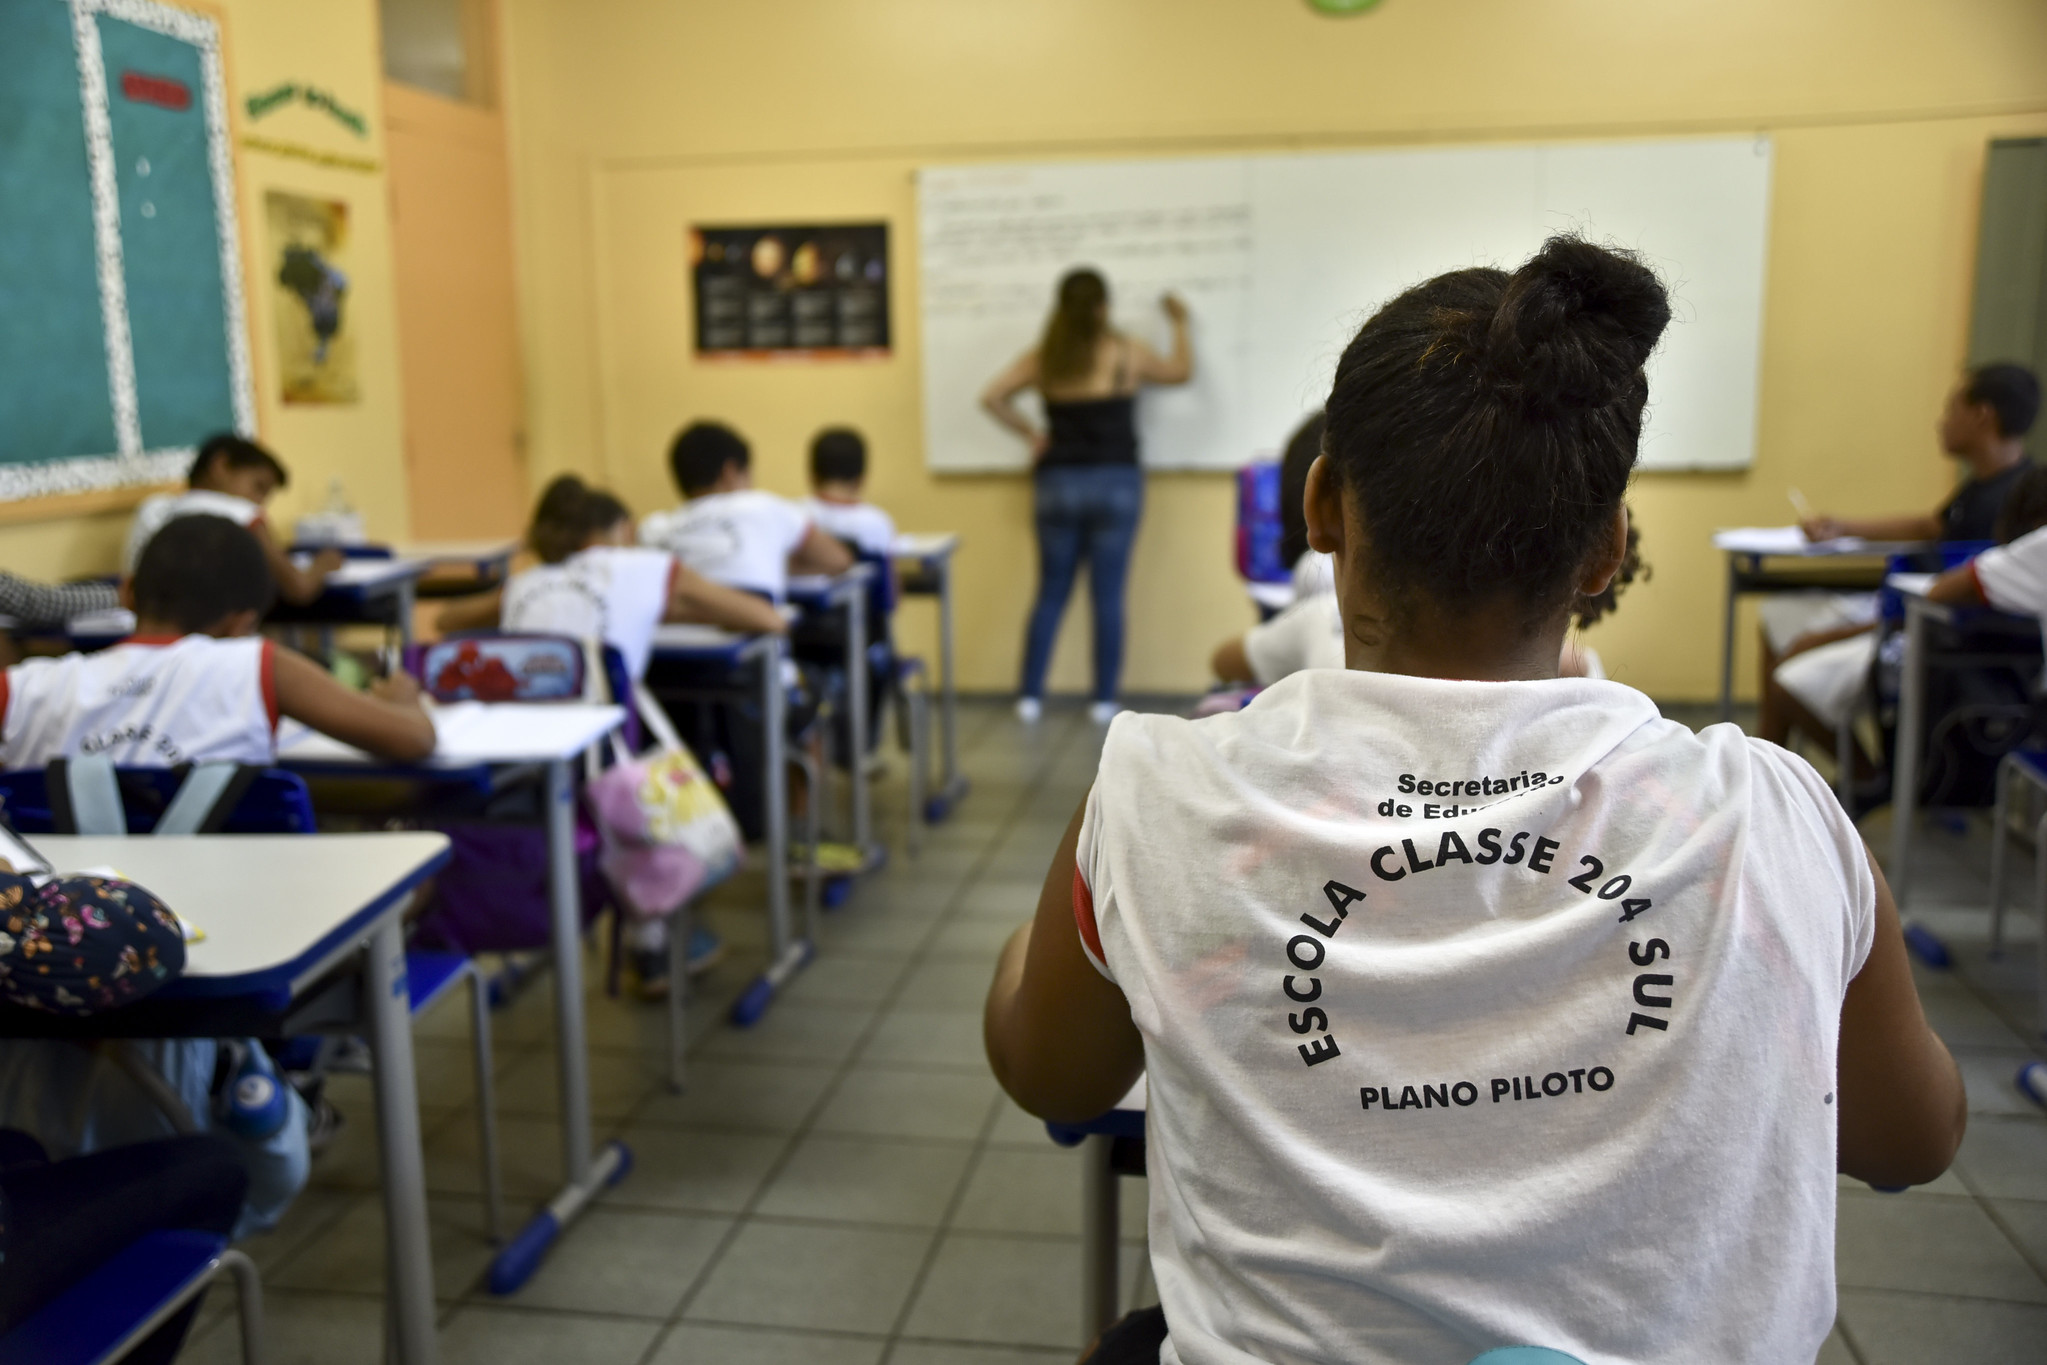 Brazilian youth learning in classroom